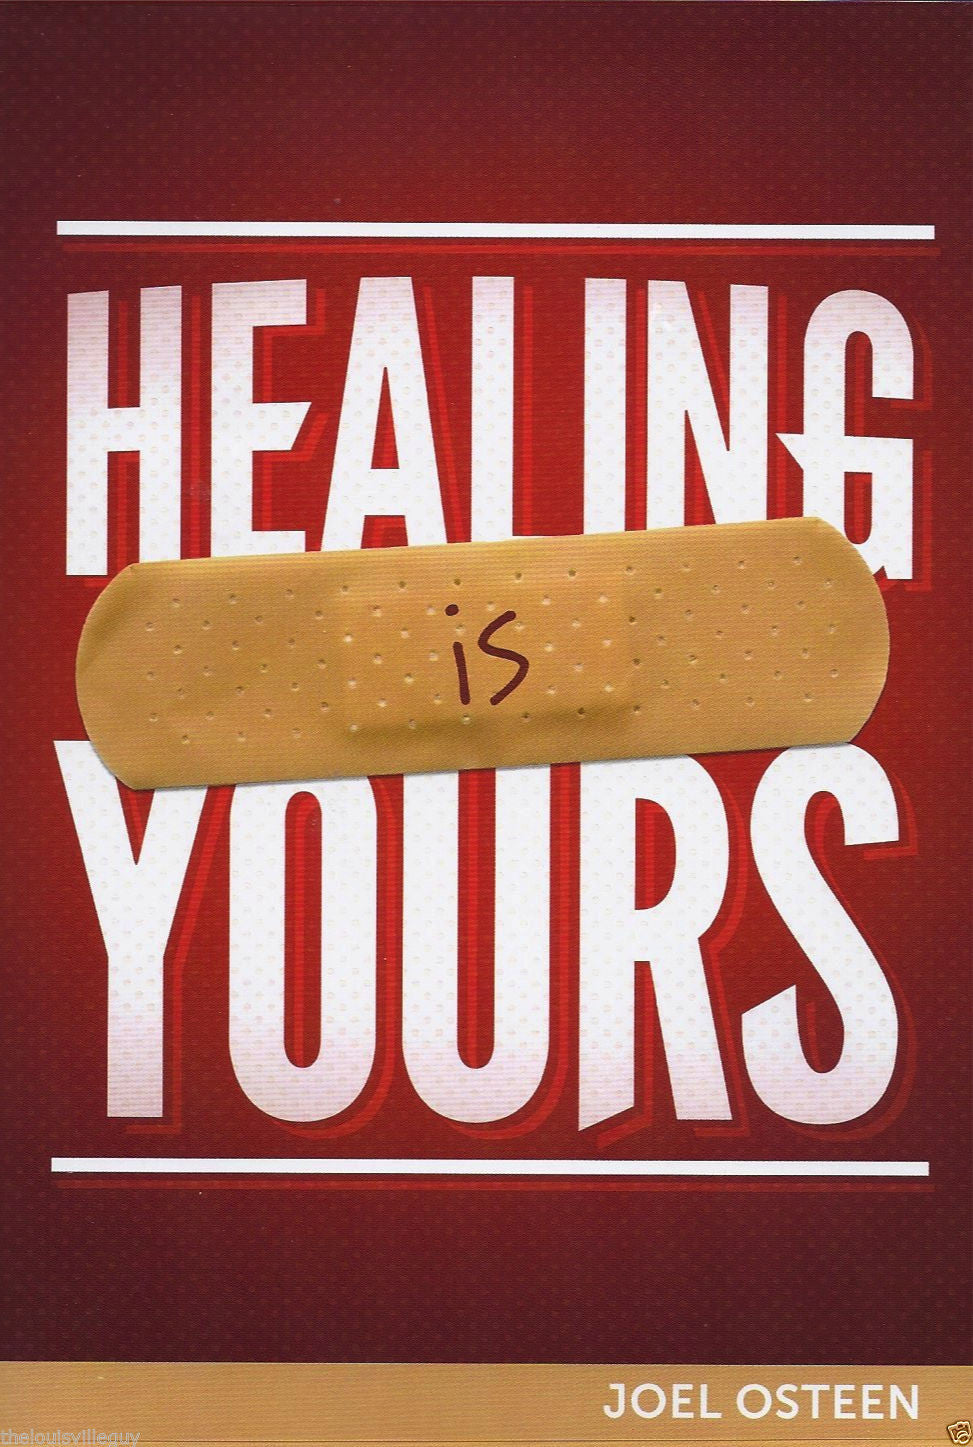 Joel Osteen "Healing Is Yours!" CD & DVD Series & "Healed of Cancer" book